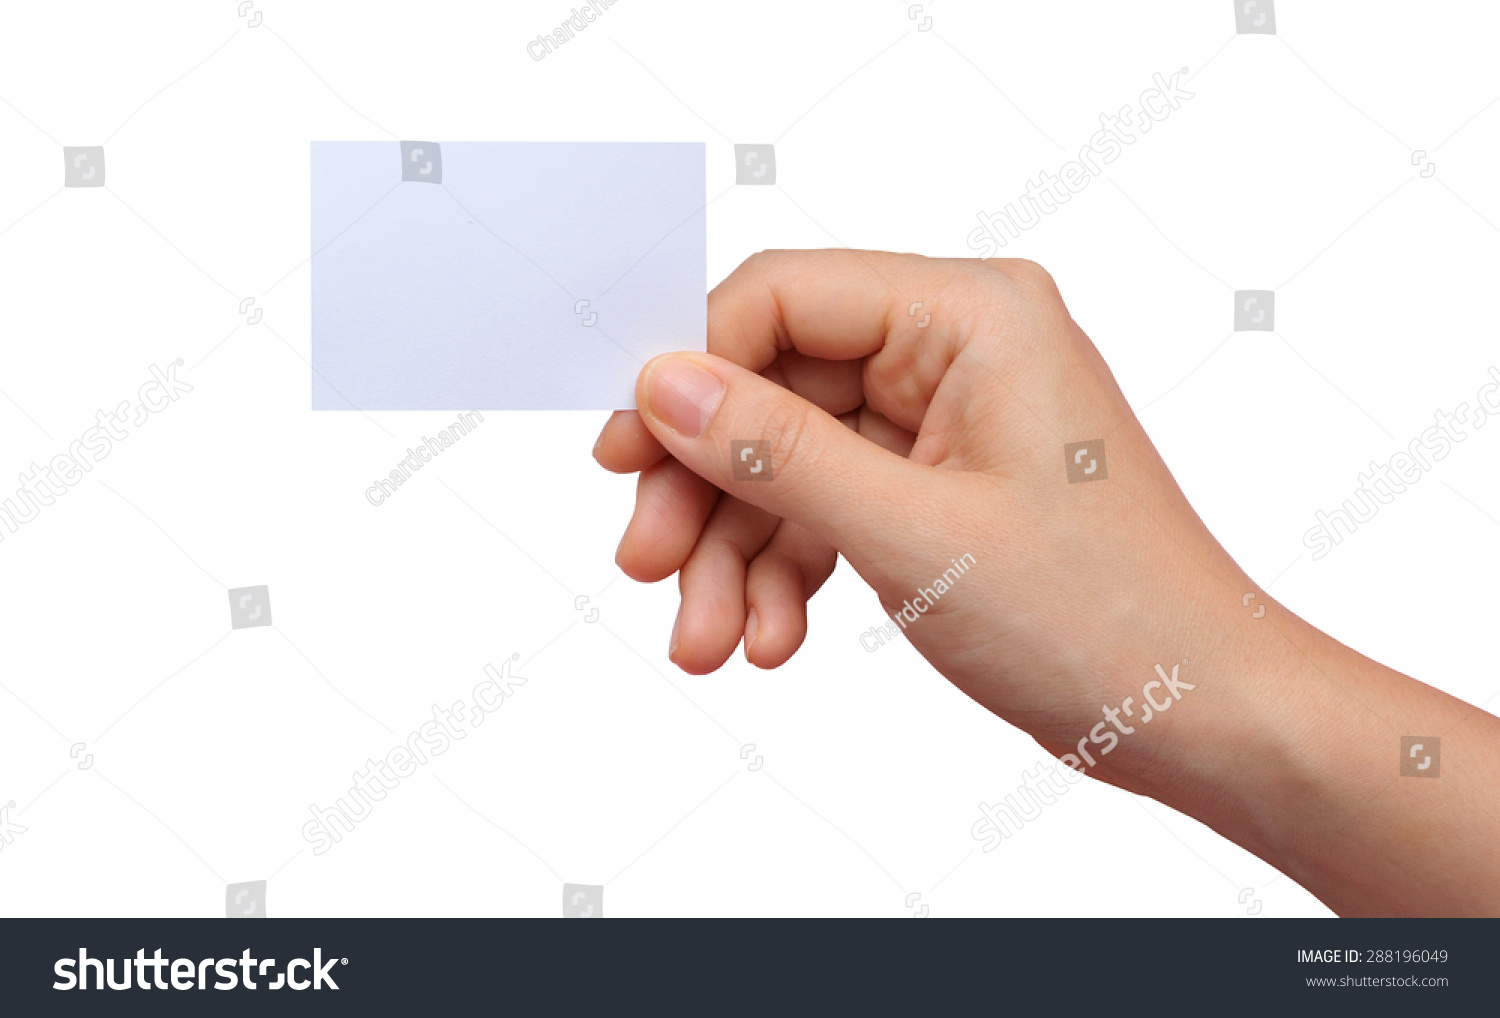 Hand holding paper isolated on white #288196049